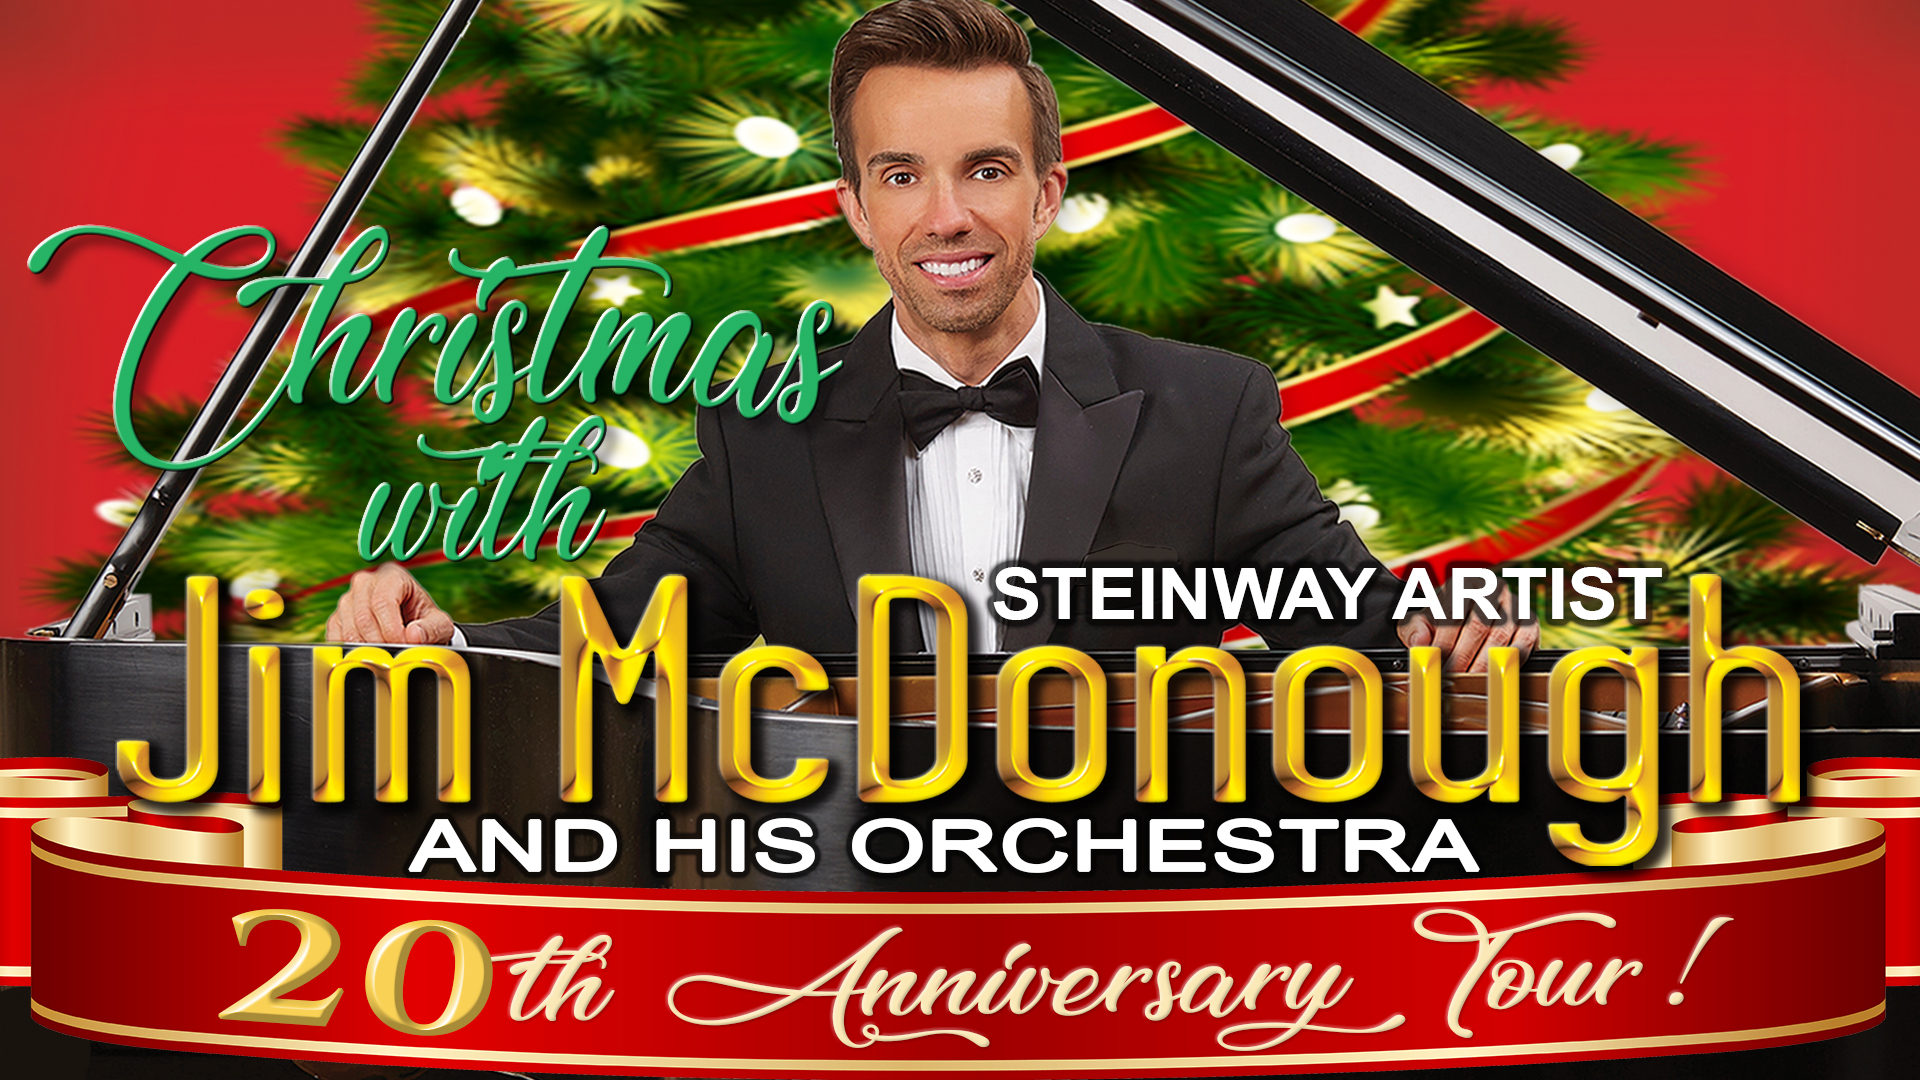 Christmas with Jim McDonough and His Orchestra: The 20th Anniversary Tour!